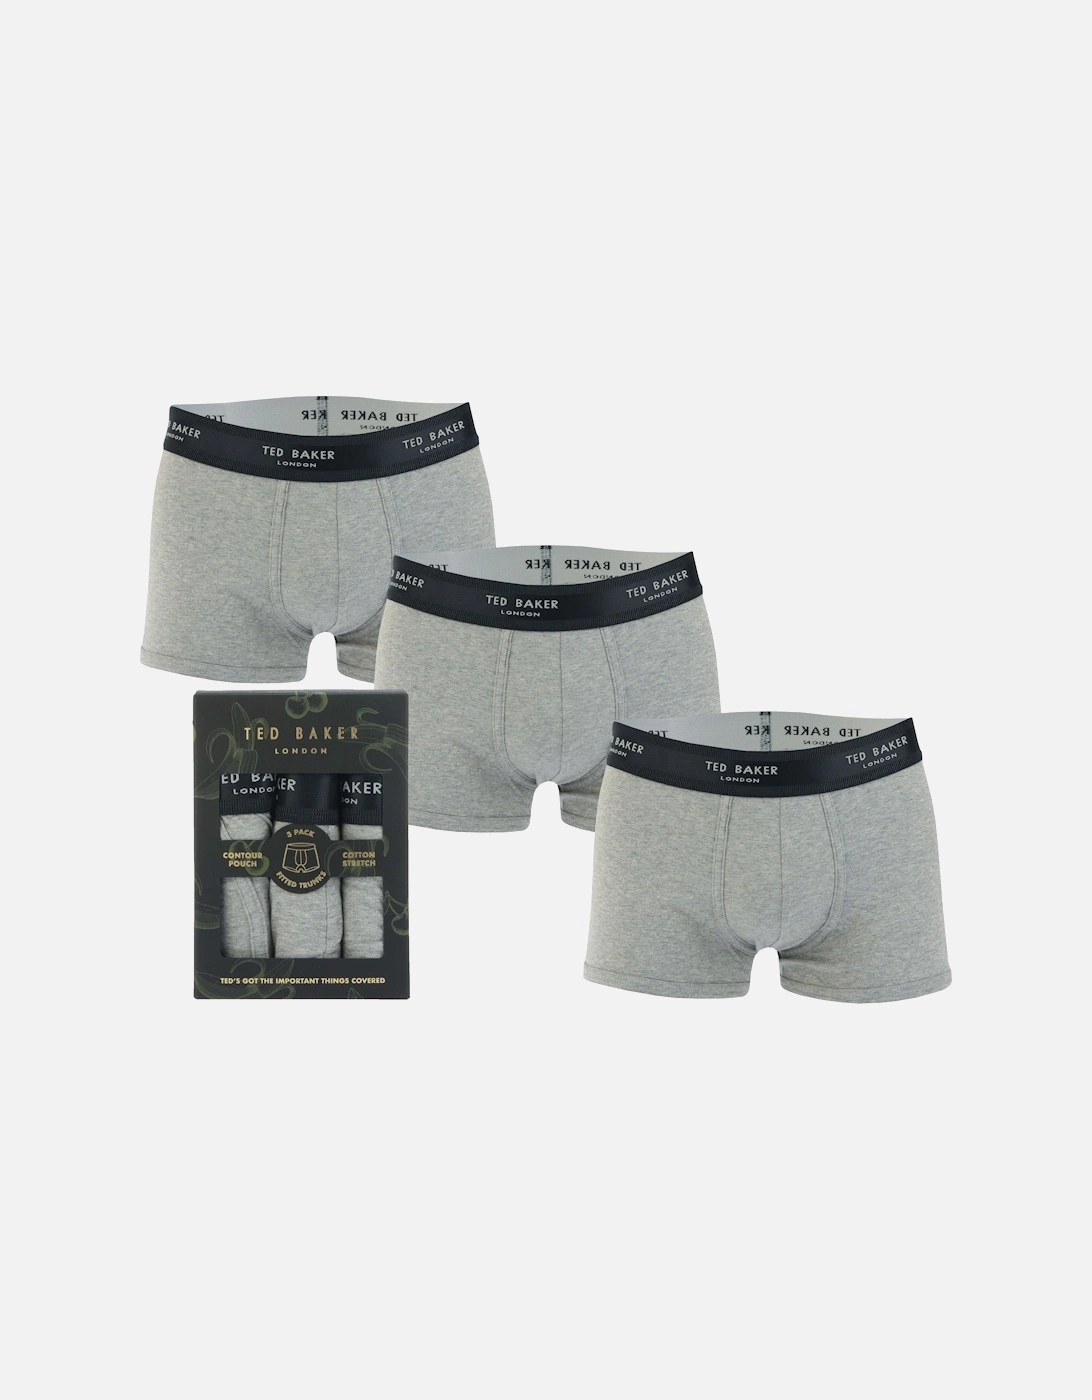 Mens 3-Pack Cotton Boxers - Mens Three Pack Cotton Fashion Trunk, 4 of 3